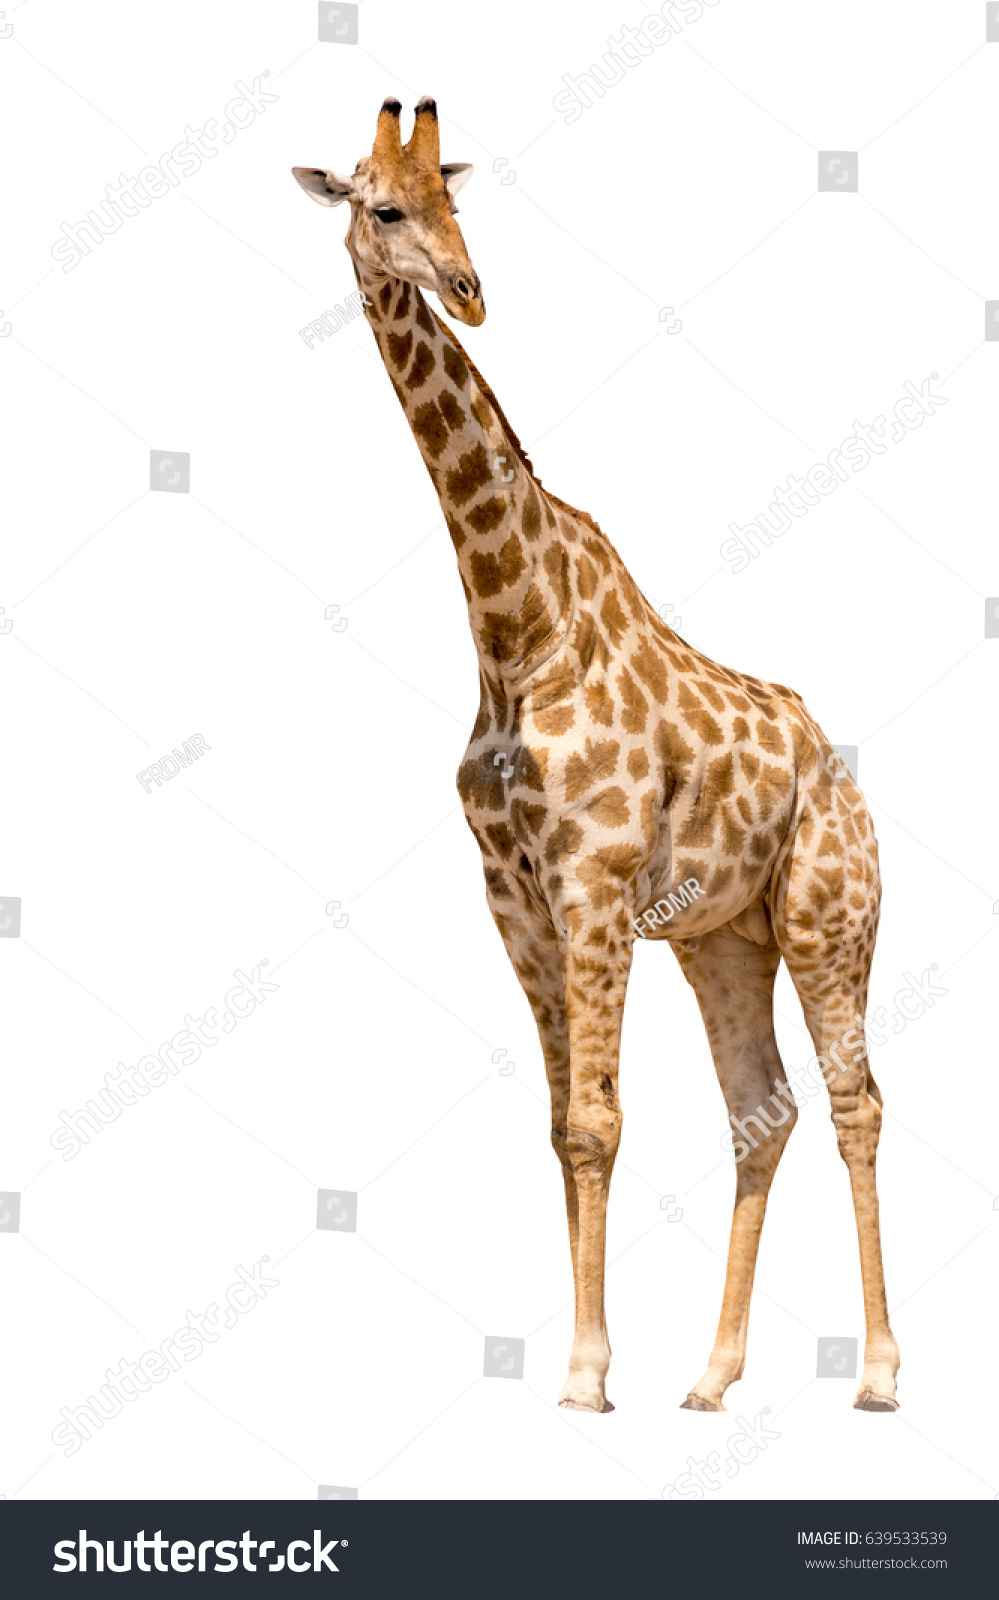 Giraffe isolated on white background, seen in namibia, africa #639533539